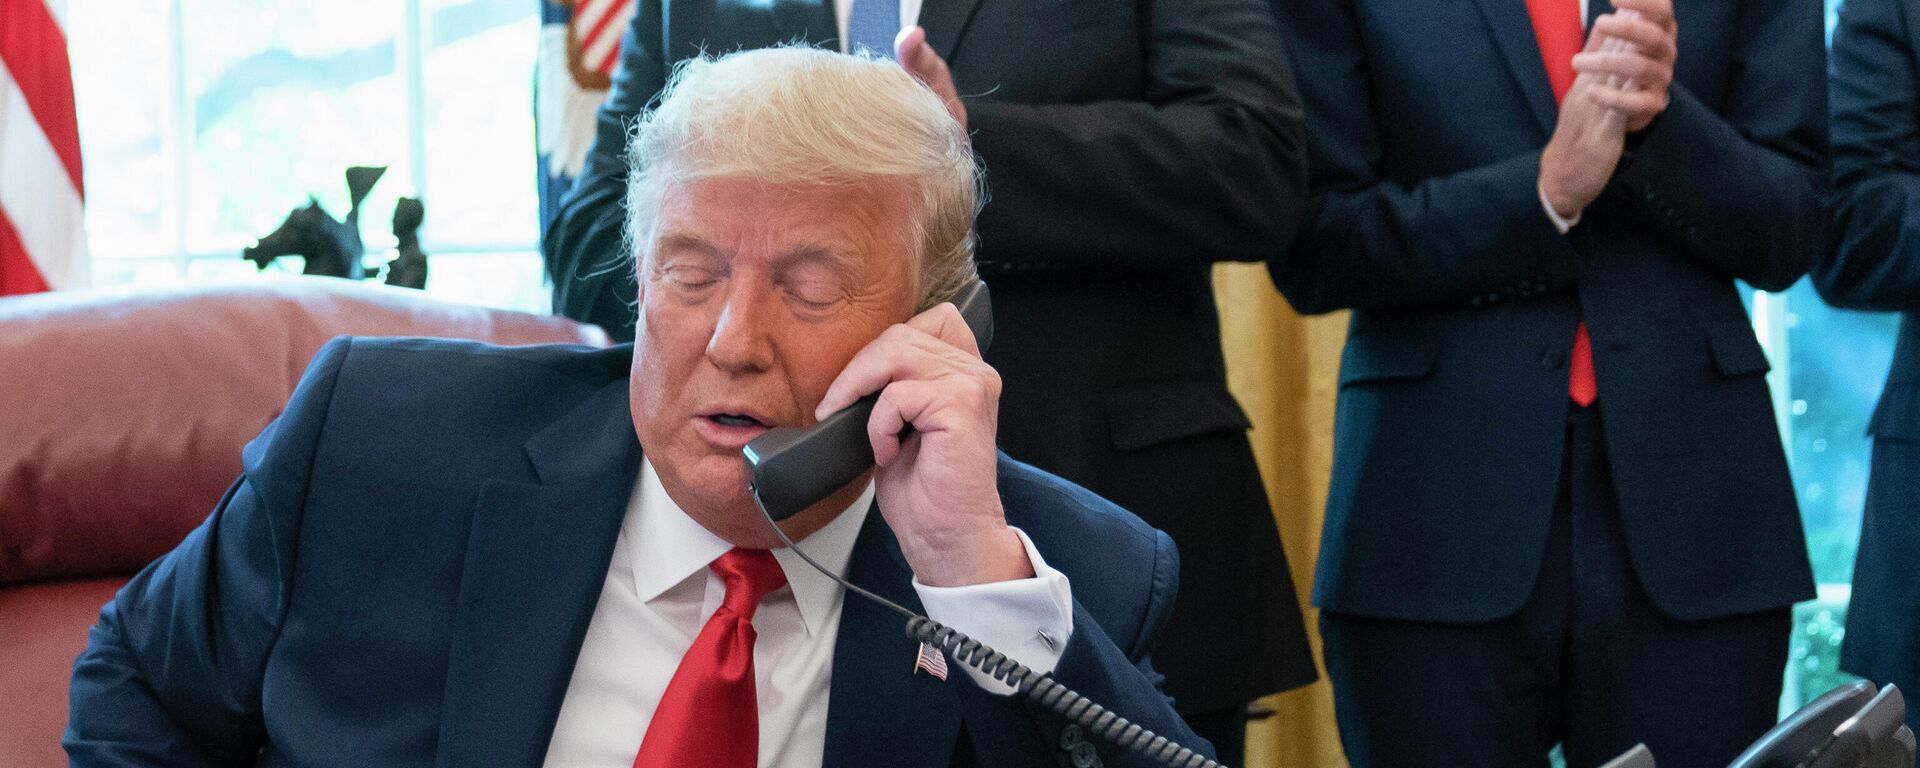  In this Oct. 23, 2020, photo, President Donald Trump talks on a phone during a call with the leaders of Sudan and Israel in the Oval Office of the White House, in Washington.  - Sputnik International, 1920, 22.04.2022